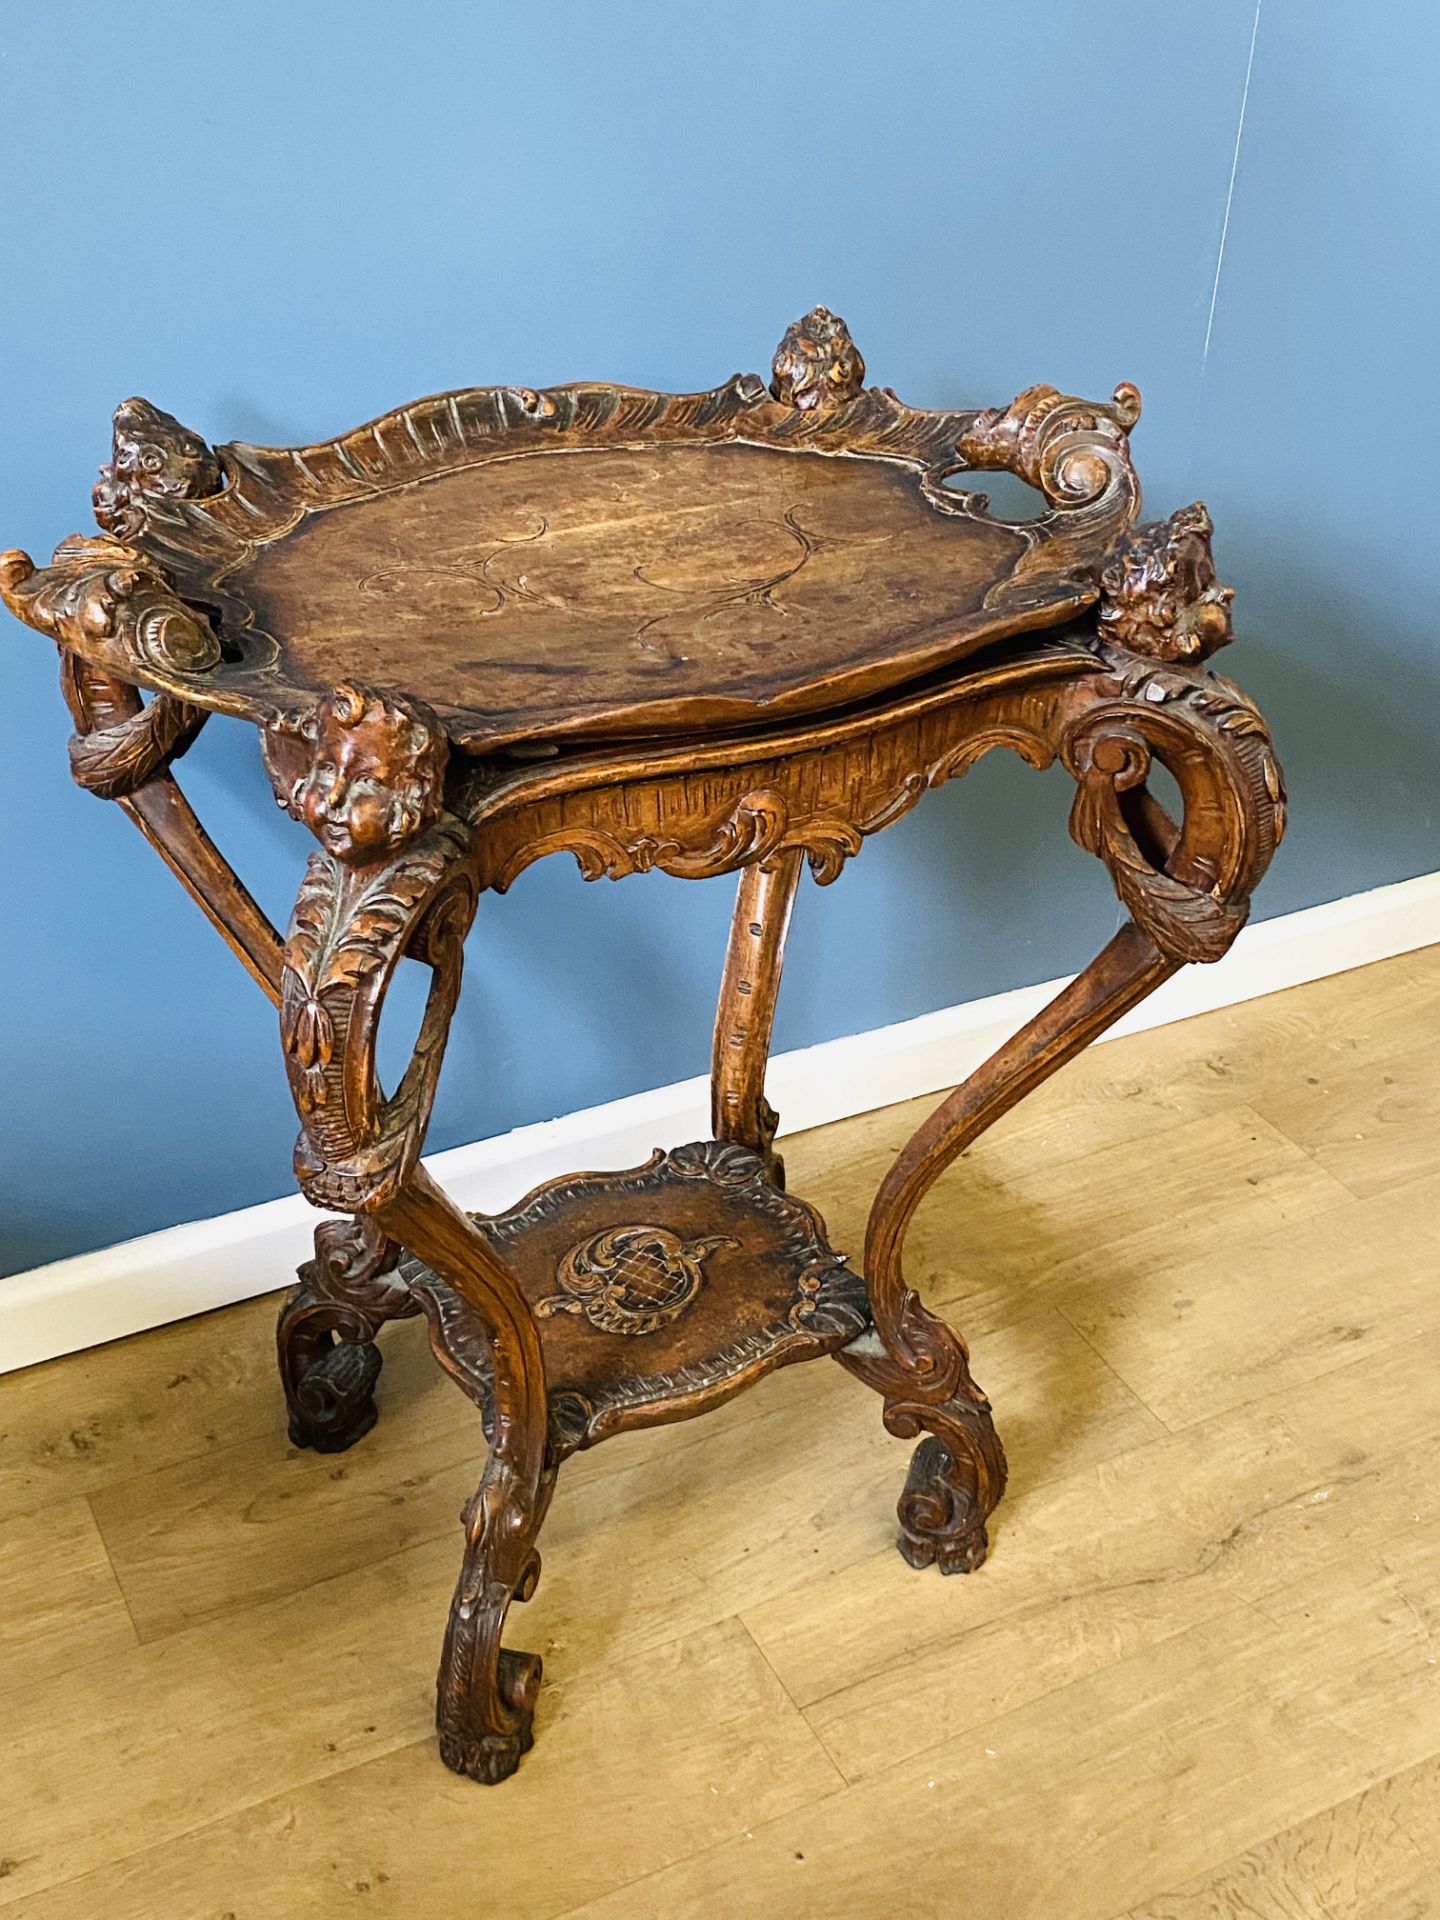 19th century Continental carved table with lift off tray - Image 5 of 6